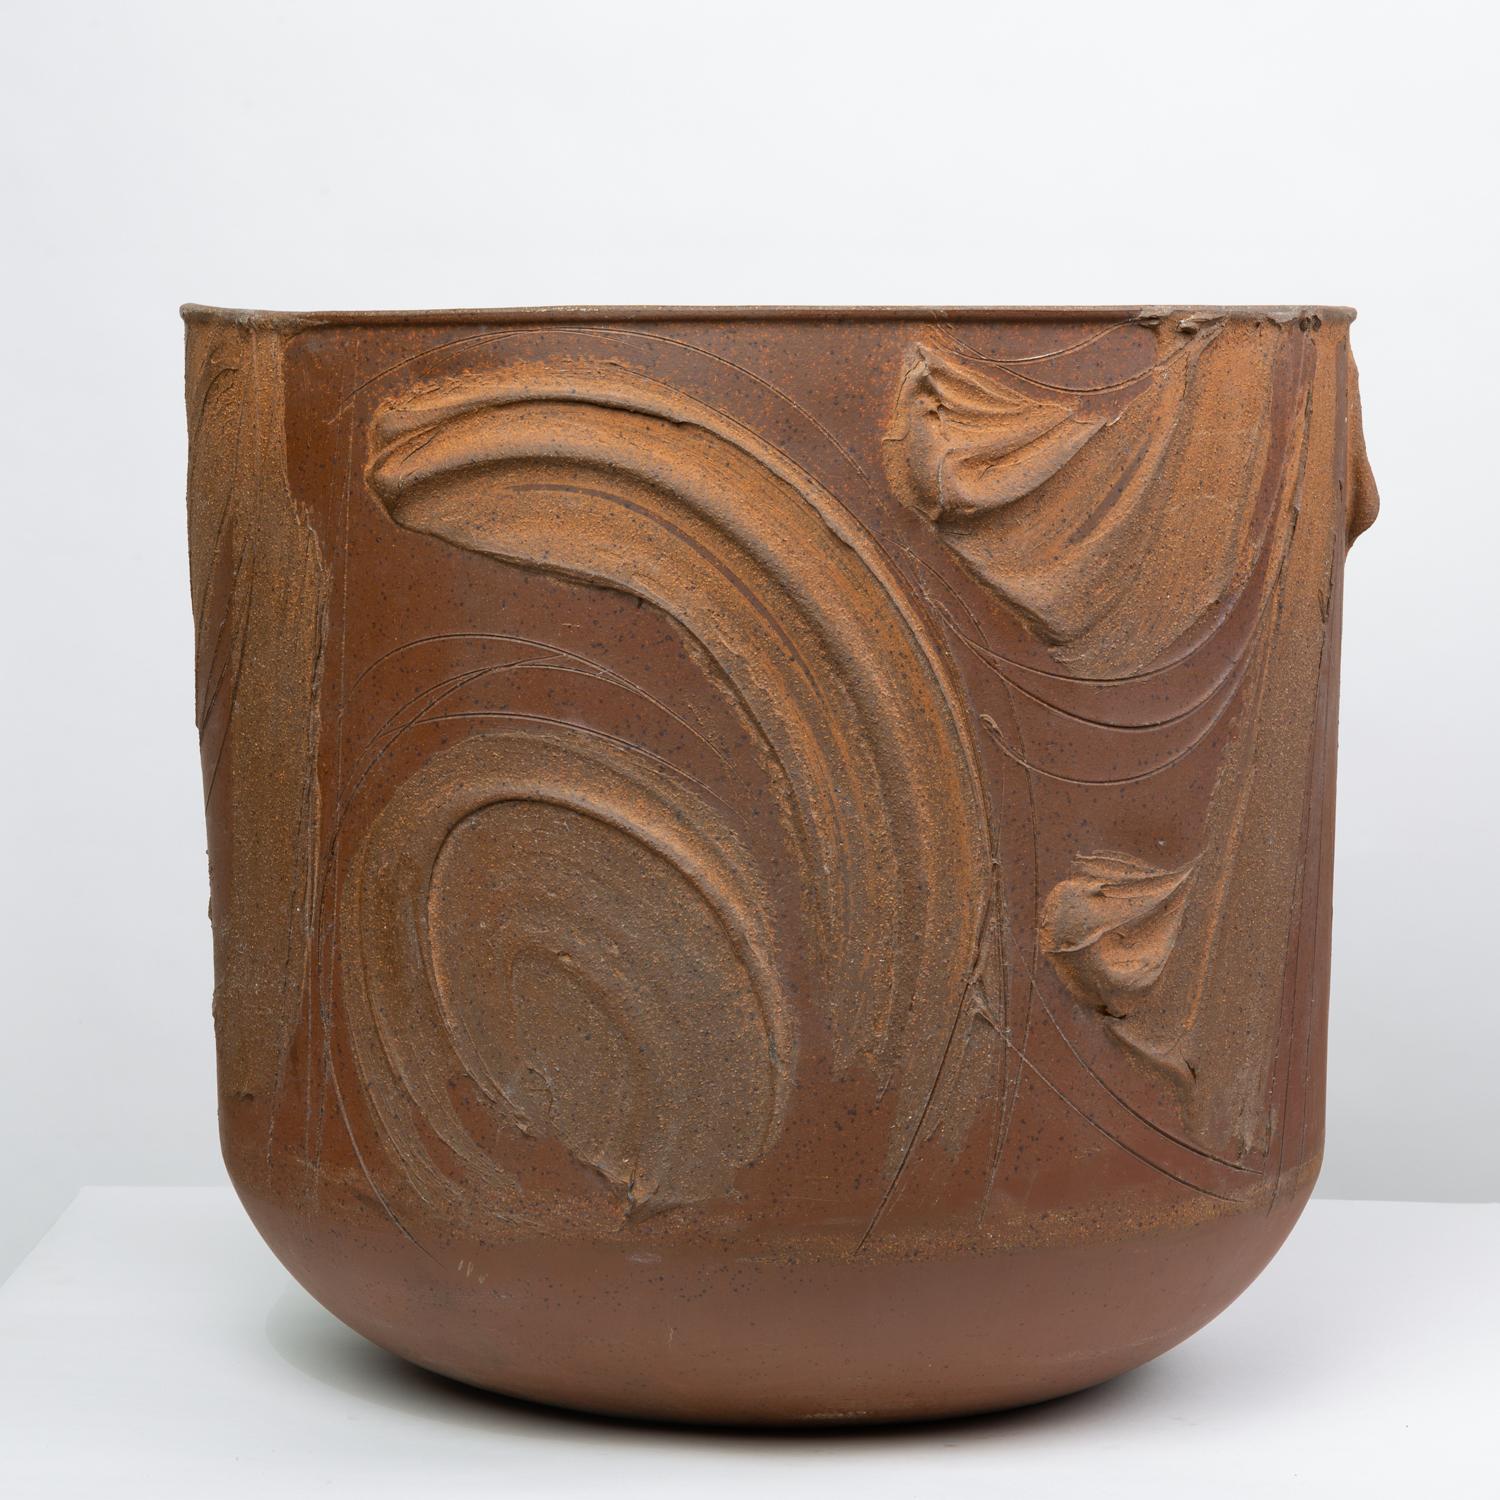 Glazed Pro/Artisan “Expressive” Planter by David Cressey for Architectural Pottery